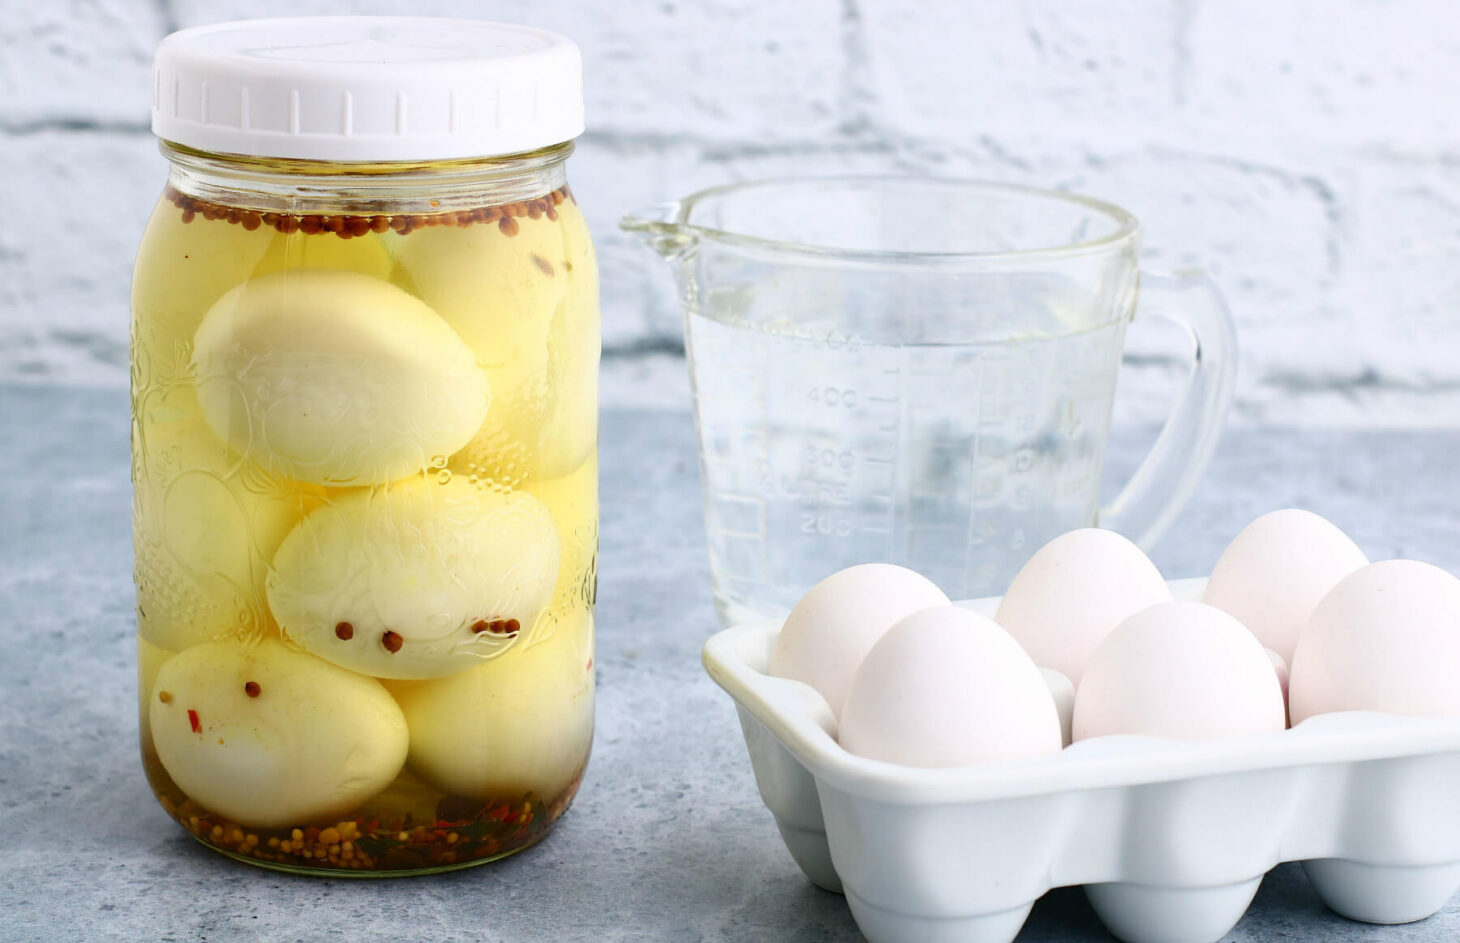 Hard boiled Pickled eggs in a jar with a tray of eggs nearby.